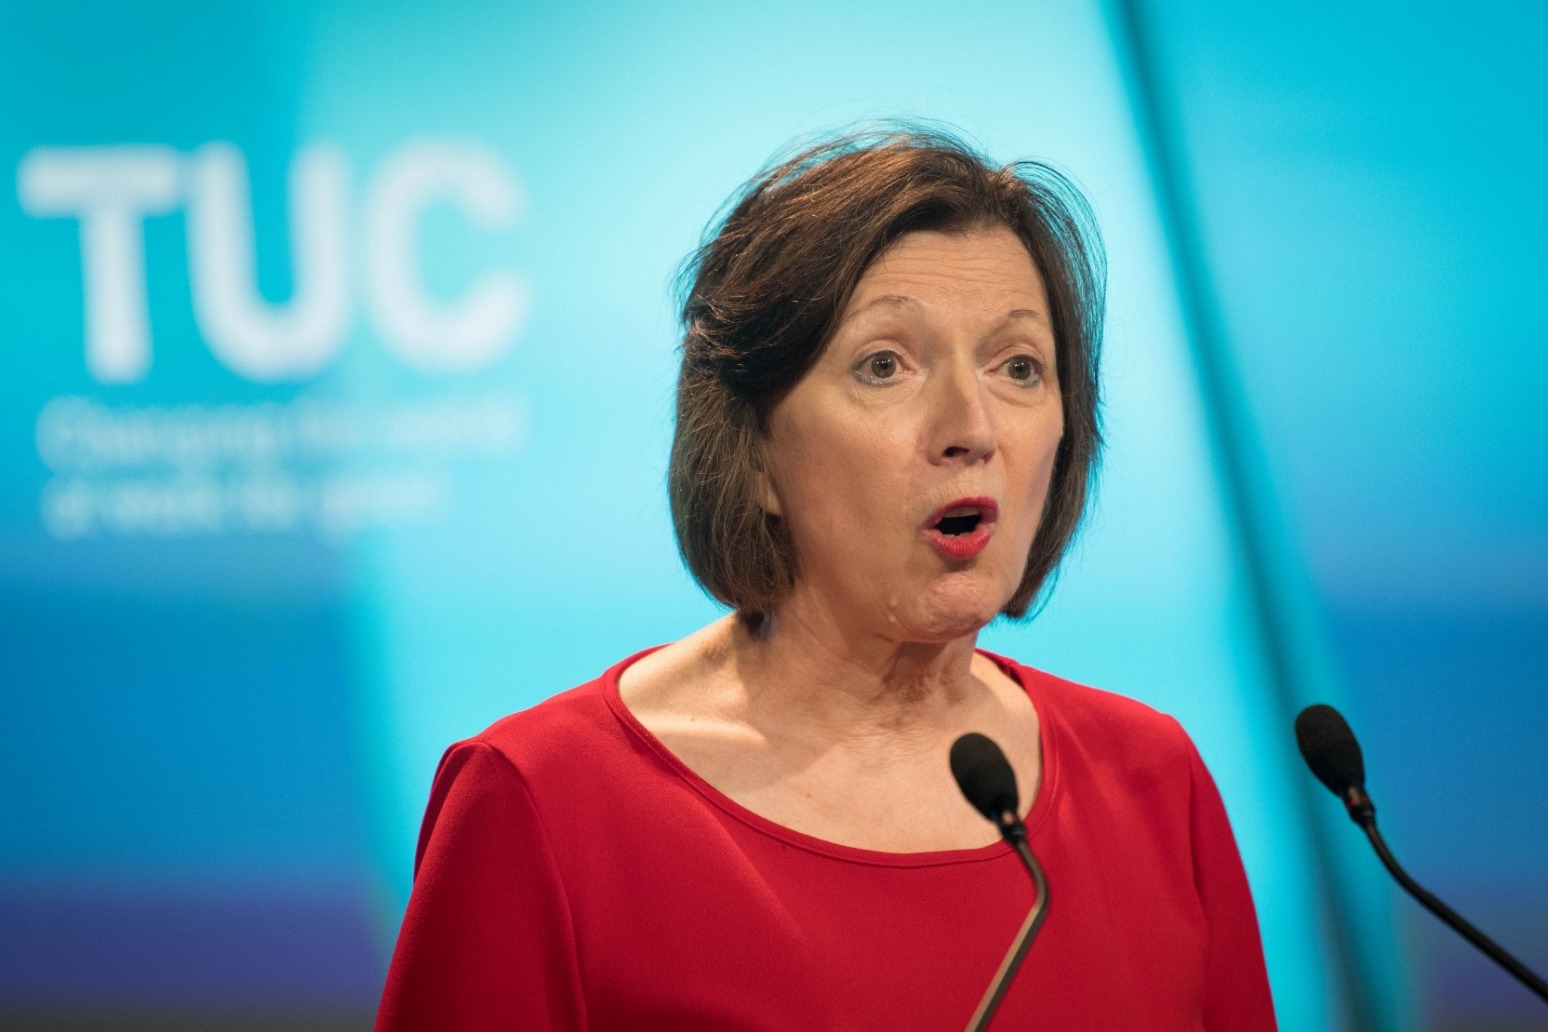 TUC warns new Prime Minister not to weaken workers rights